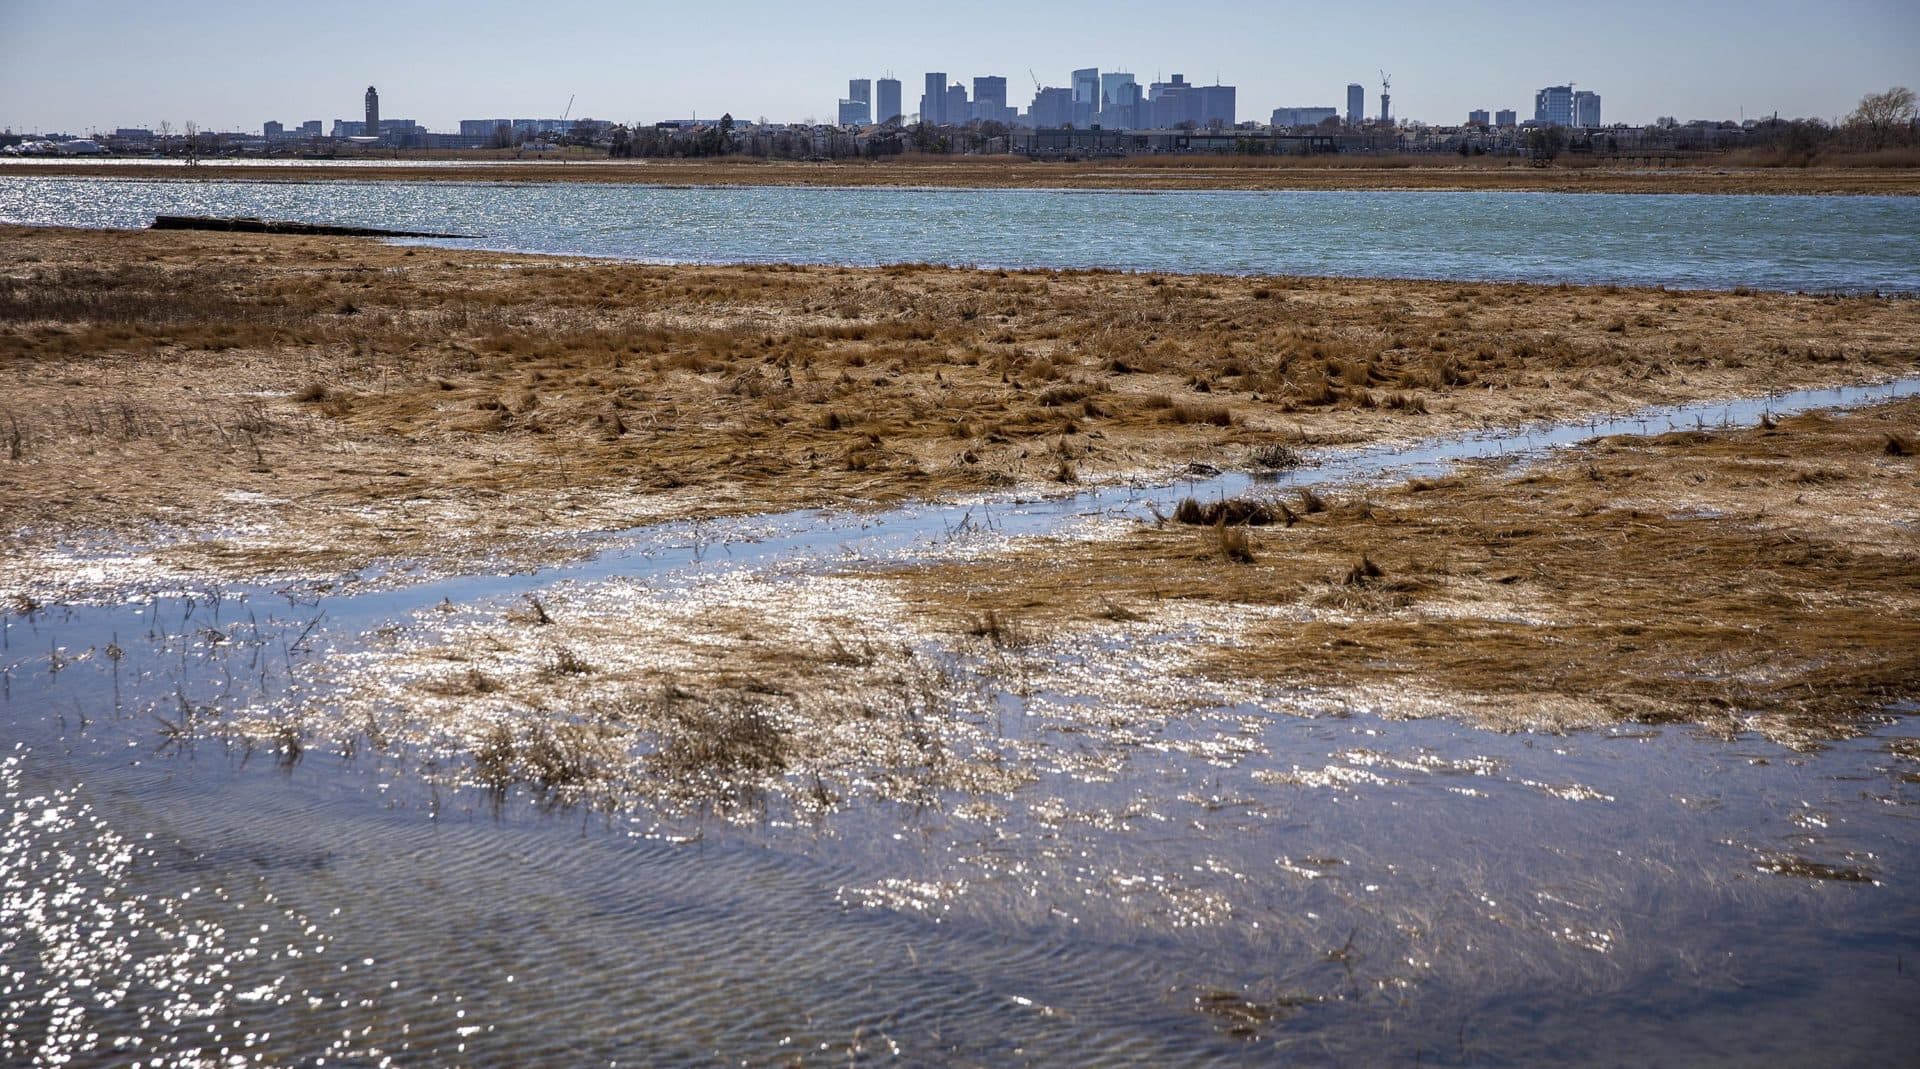 Looking across Belle Isle Marsh to Boston on a bright spring day.